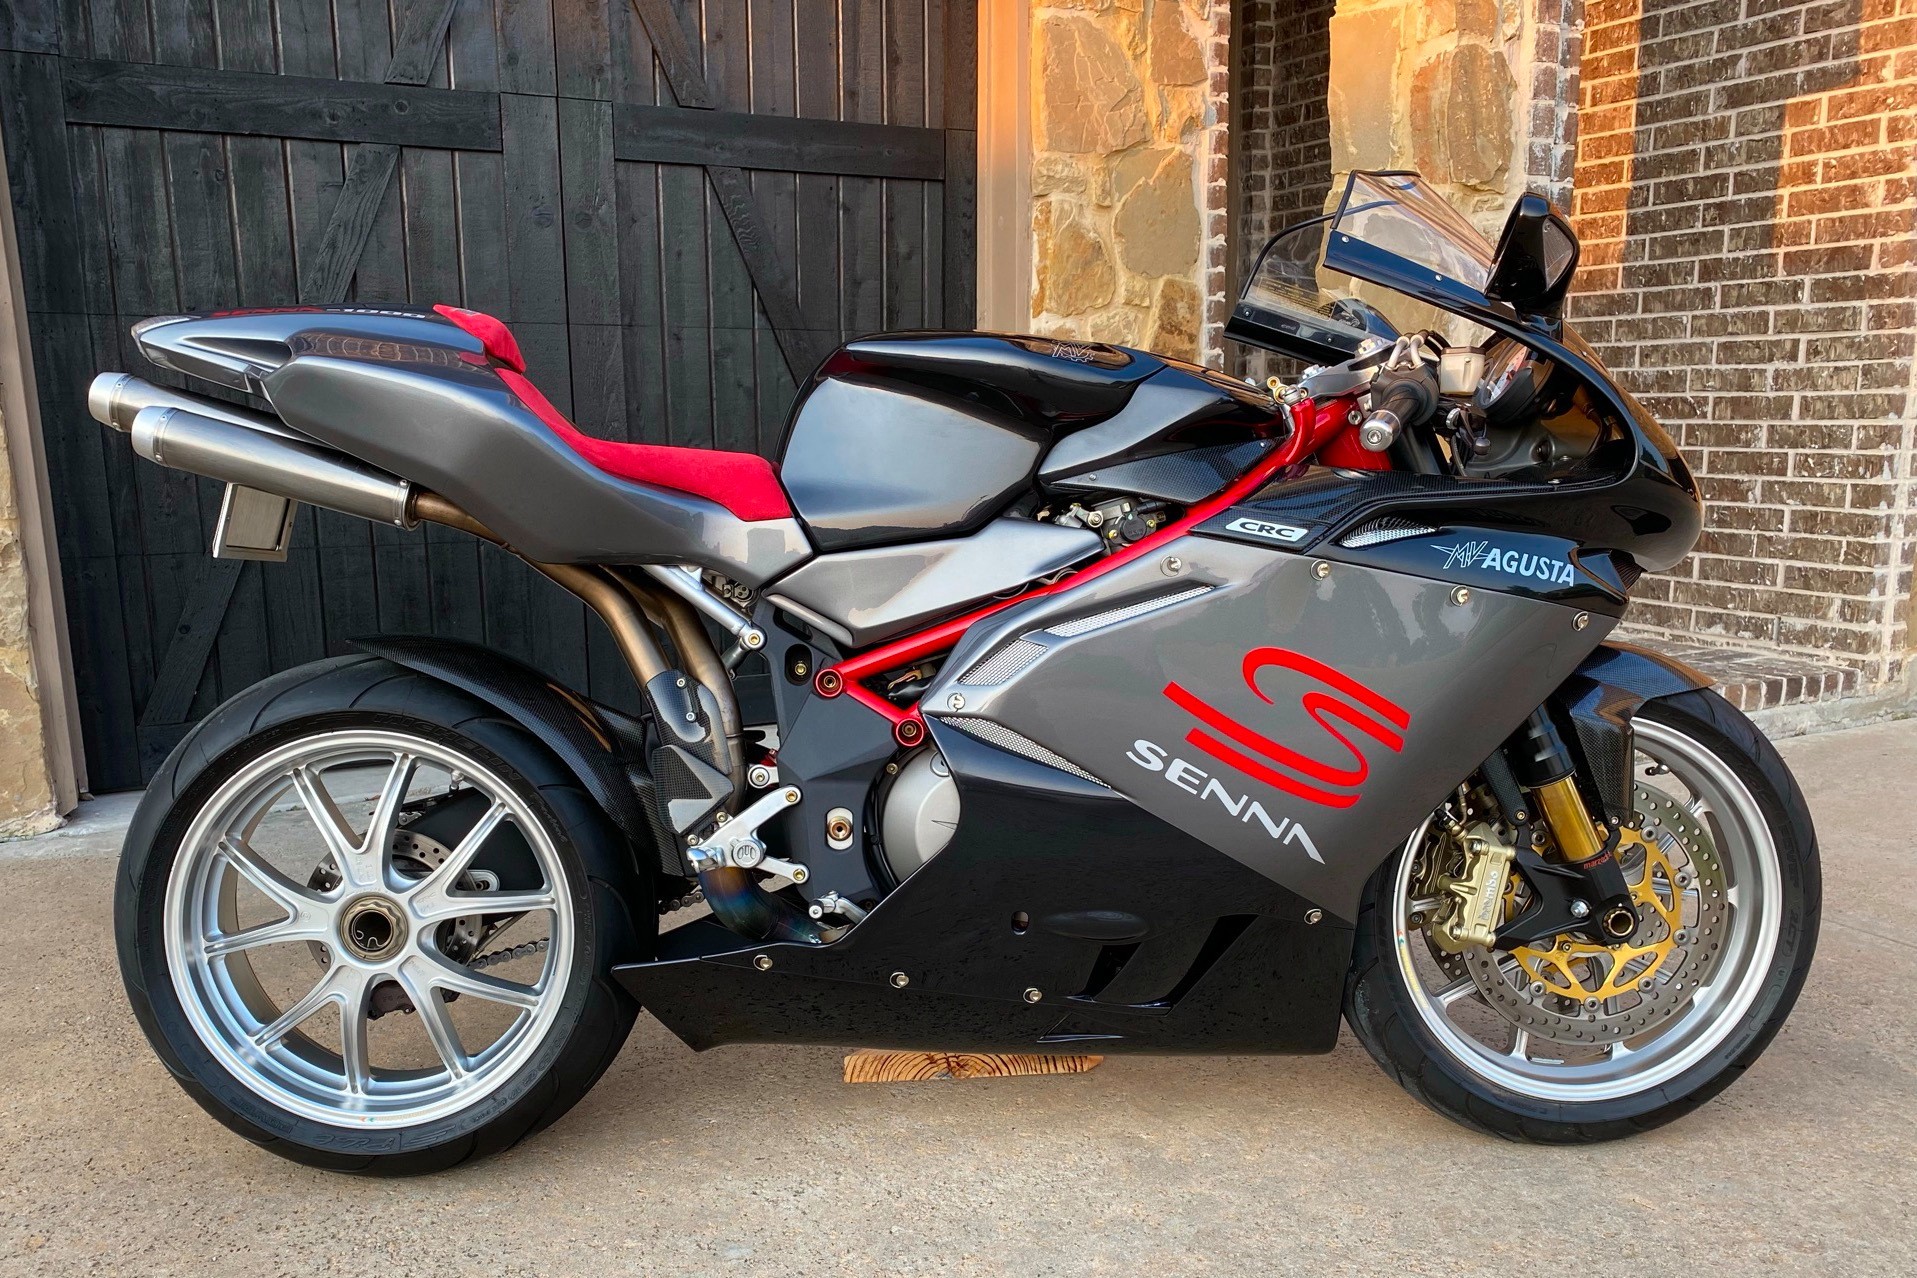 Ultra Rare Mv Agusta F4 1000 Senna Is A Two Wheeled Rocket With 172 Hp On Tap Autoevolution